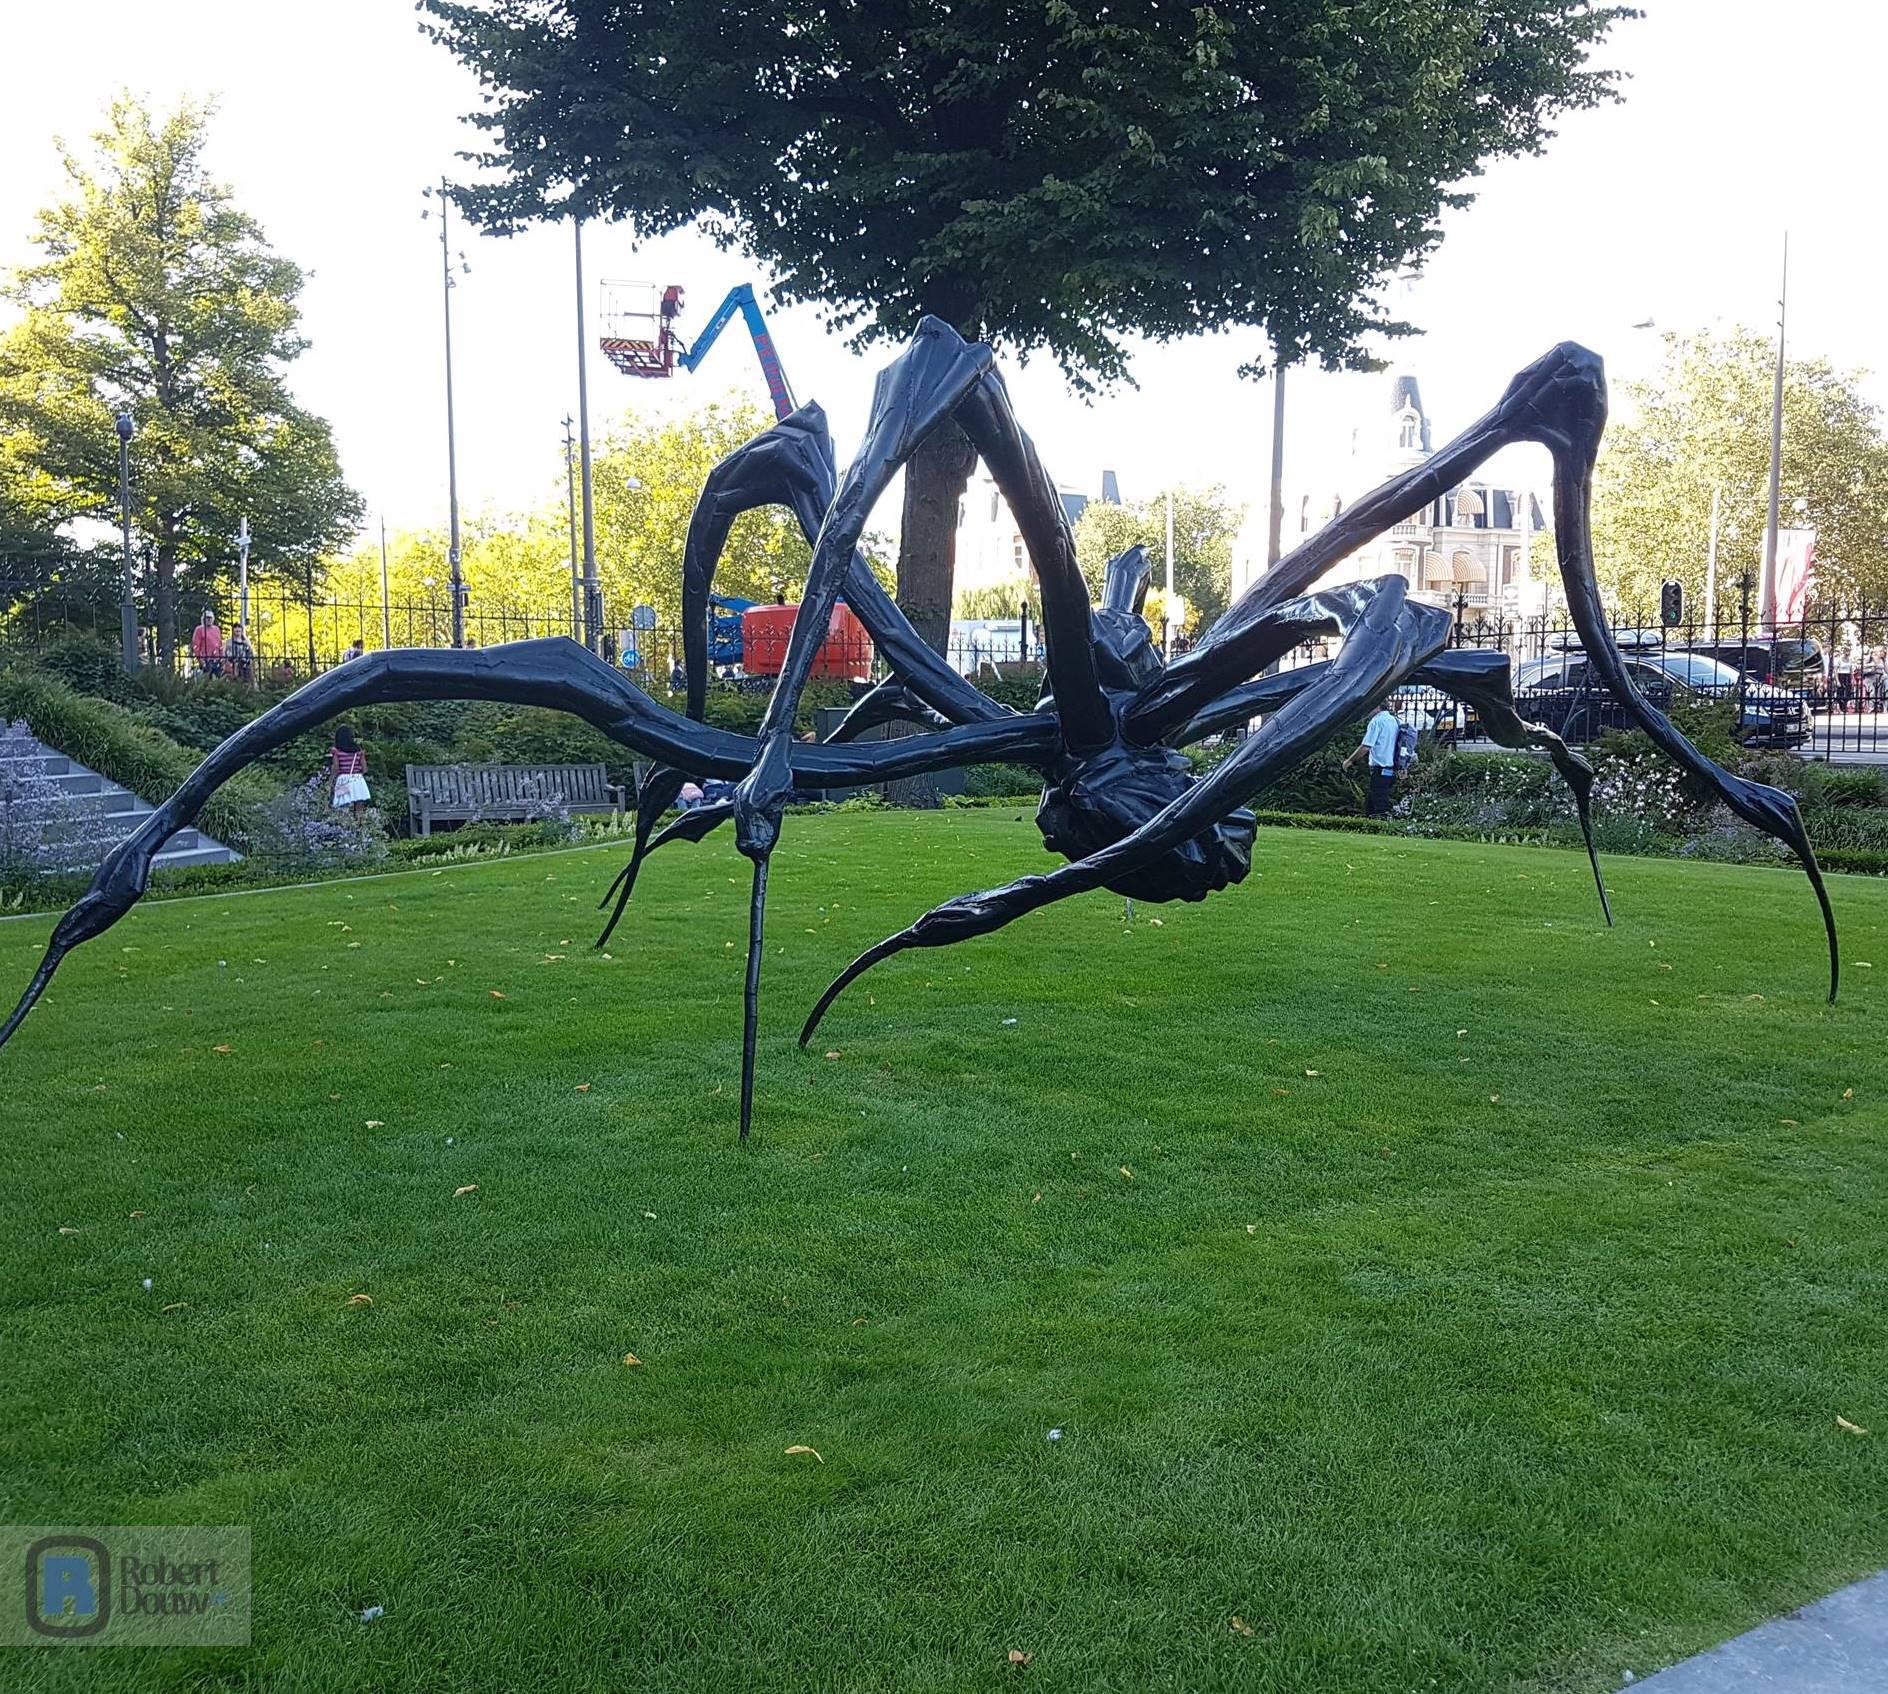 Black spider made of bronze and stainless steel, 2.70 meters high.